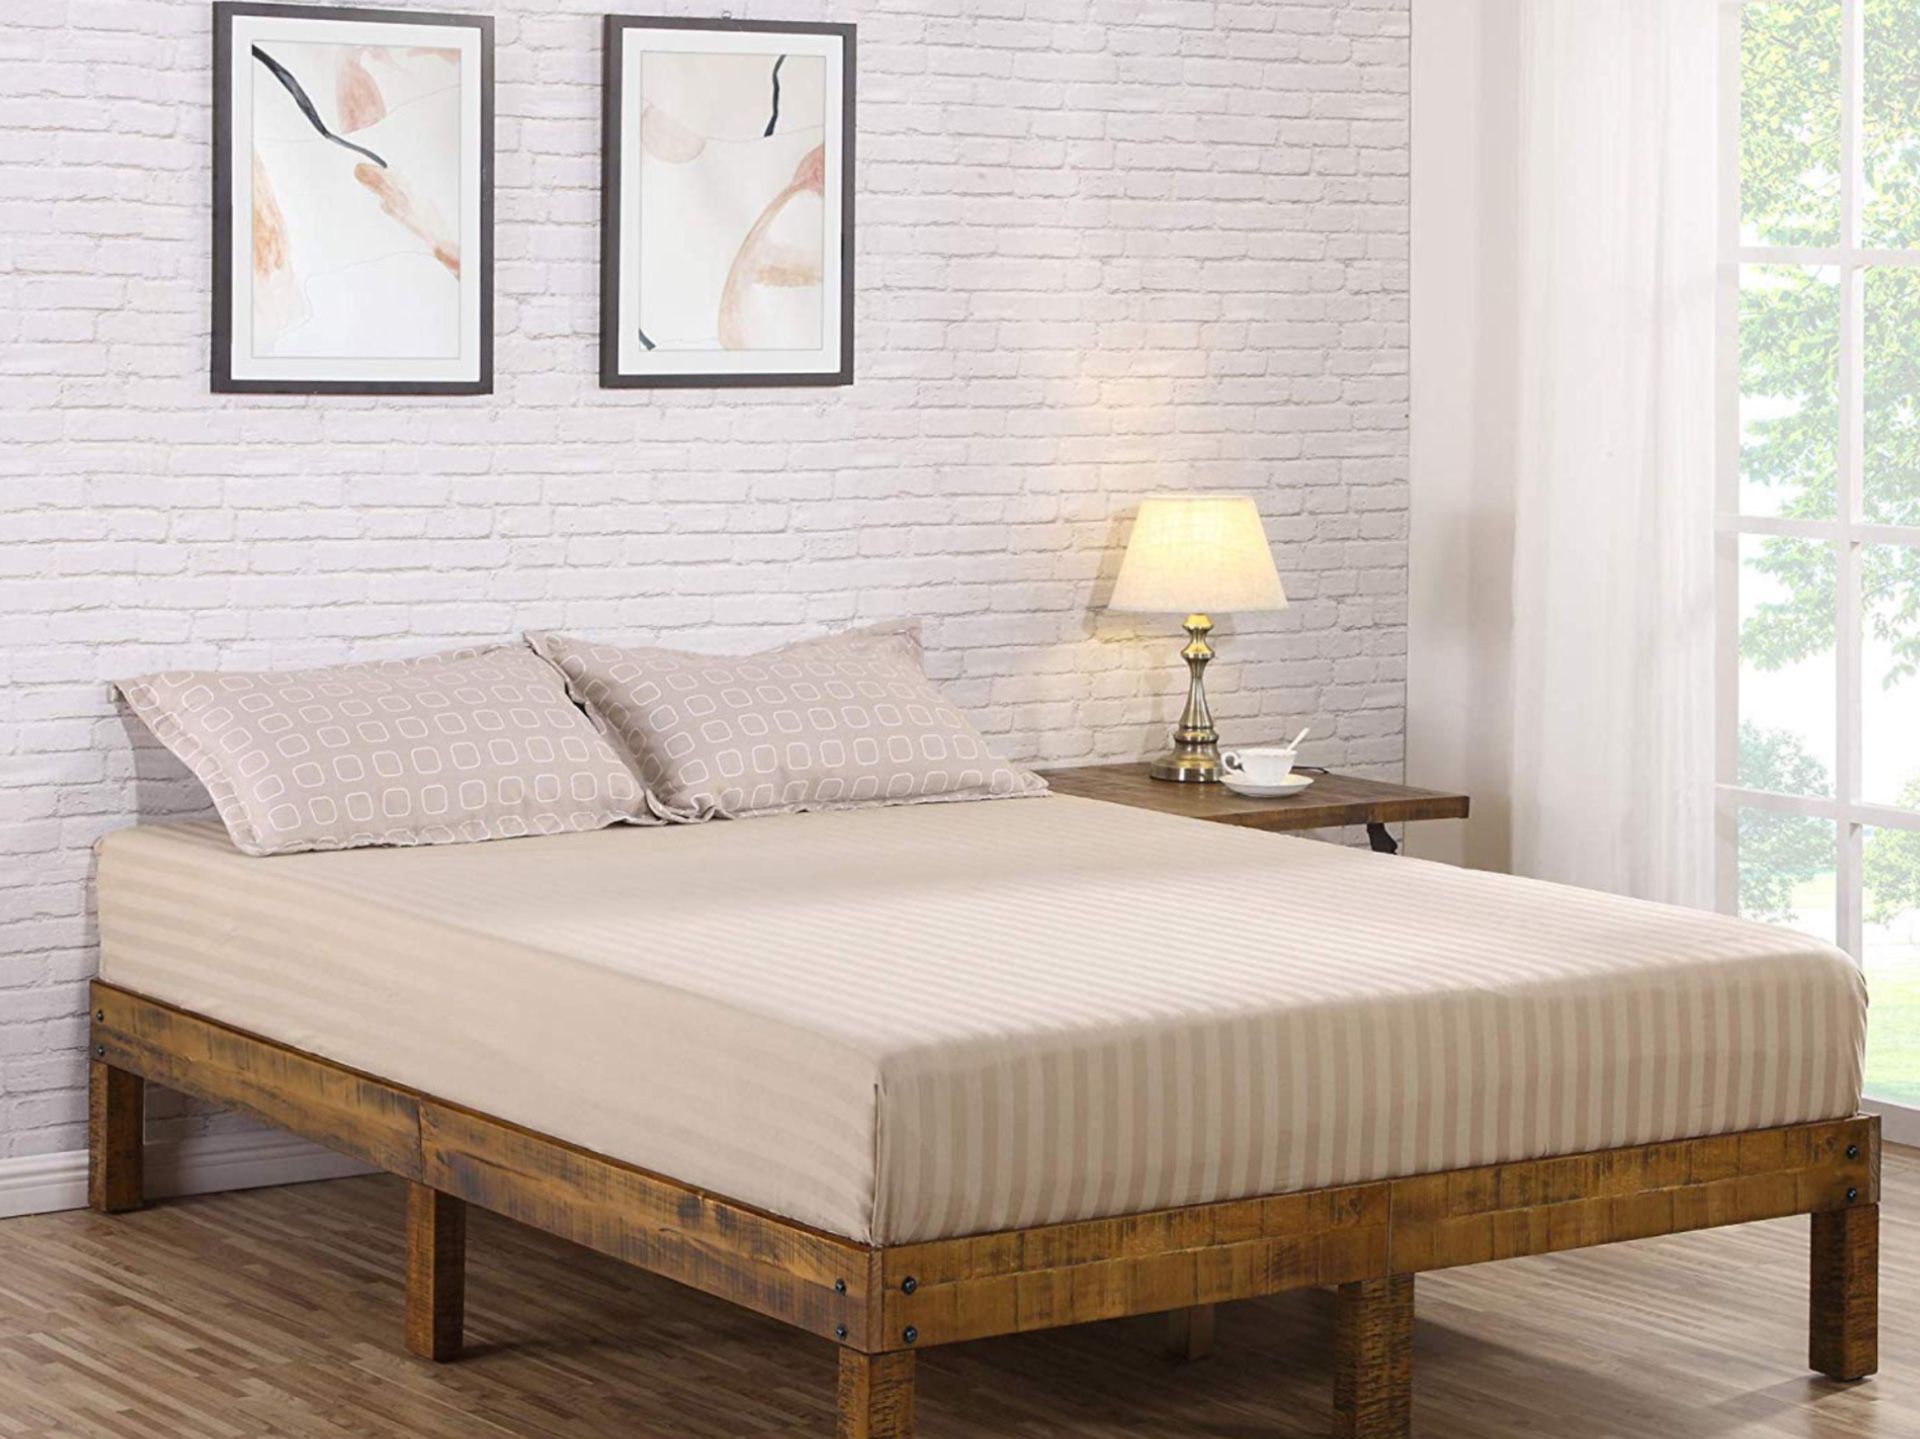 Olee queen size bed frame 14 inches high it is new in box retail price 347 plus tax here only 160.